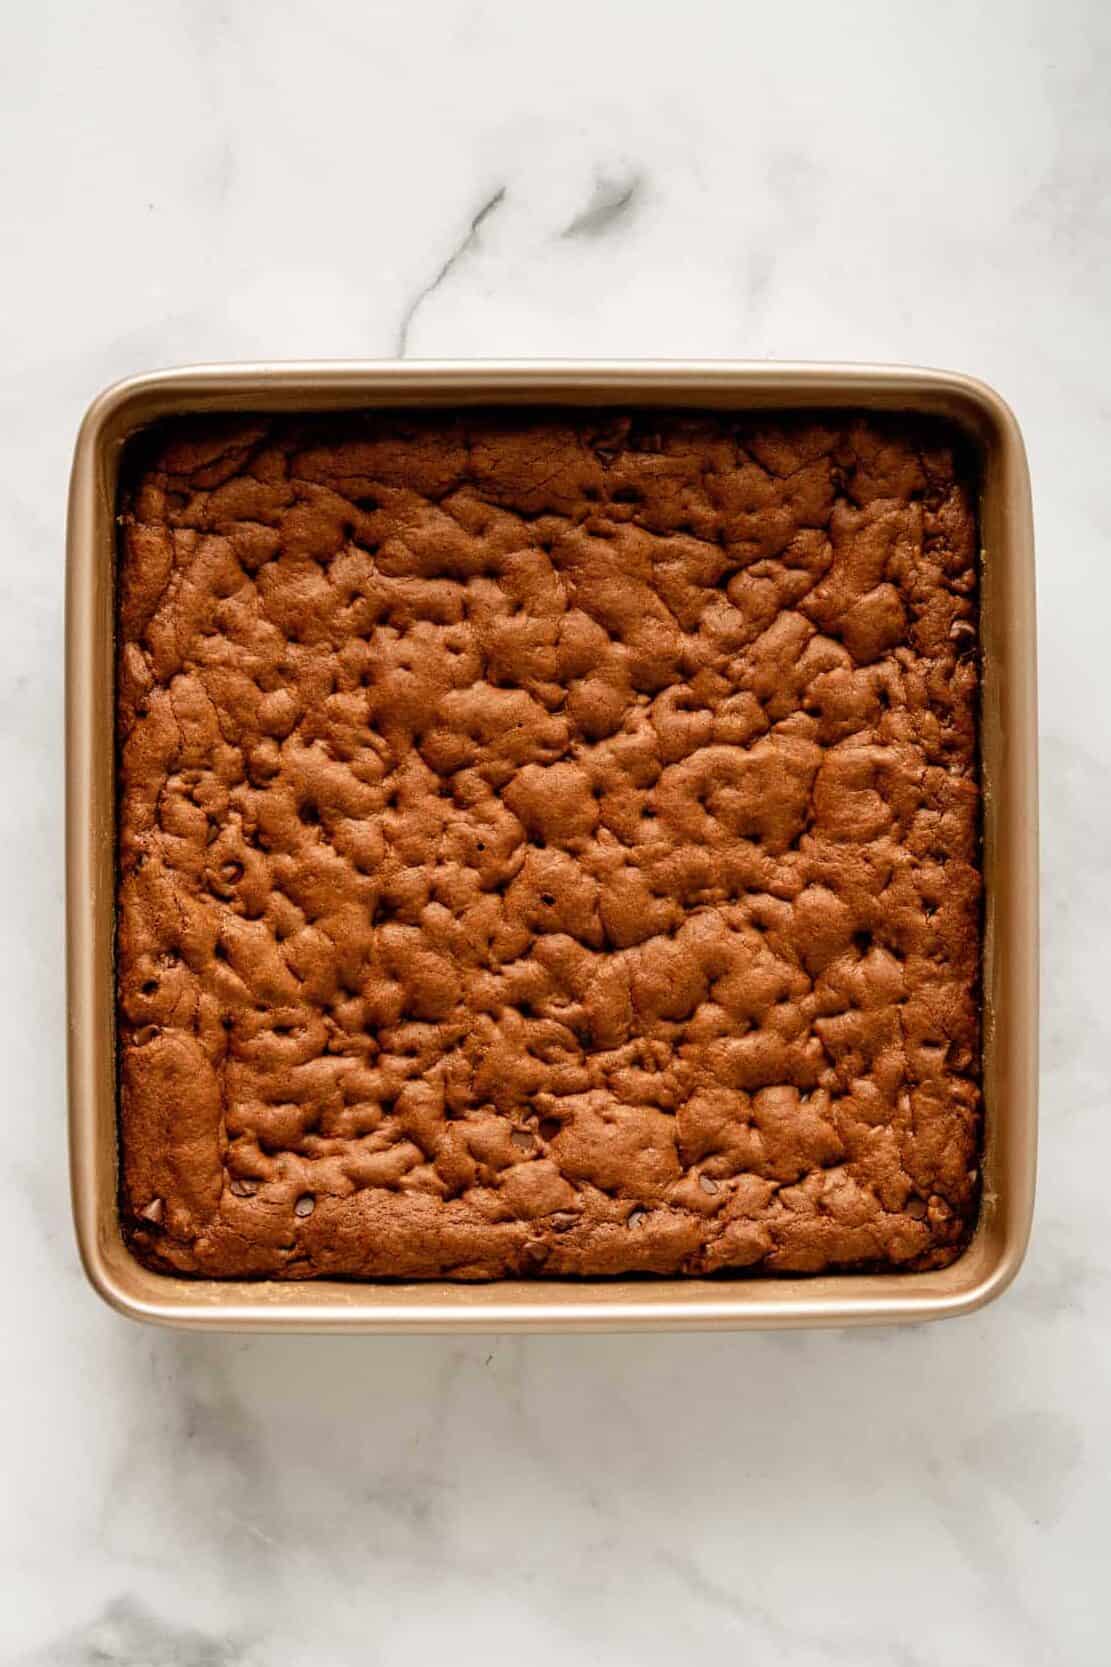 baked cake mix brownie in an 8x8 baking dish